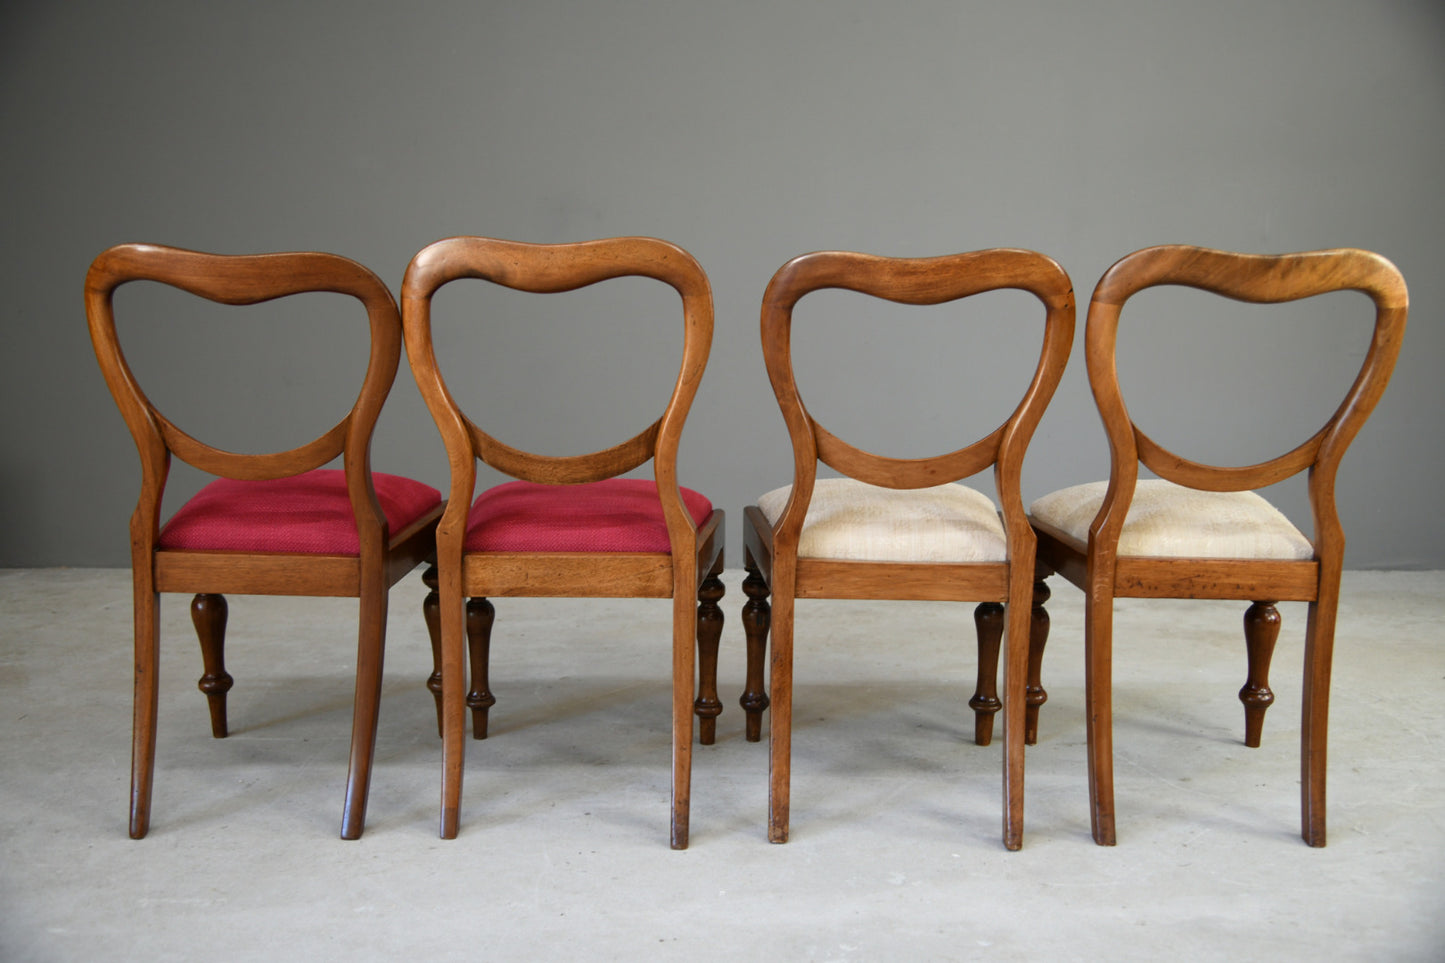 4 Victorian Balloon Back Dining Chairs